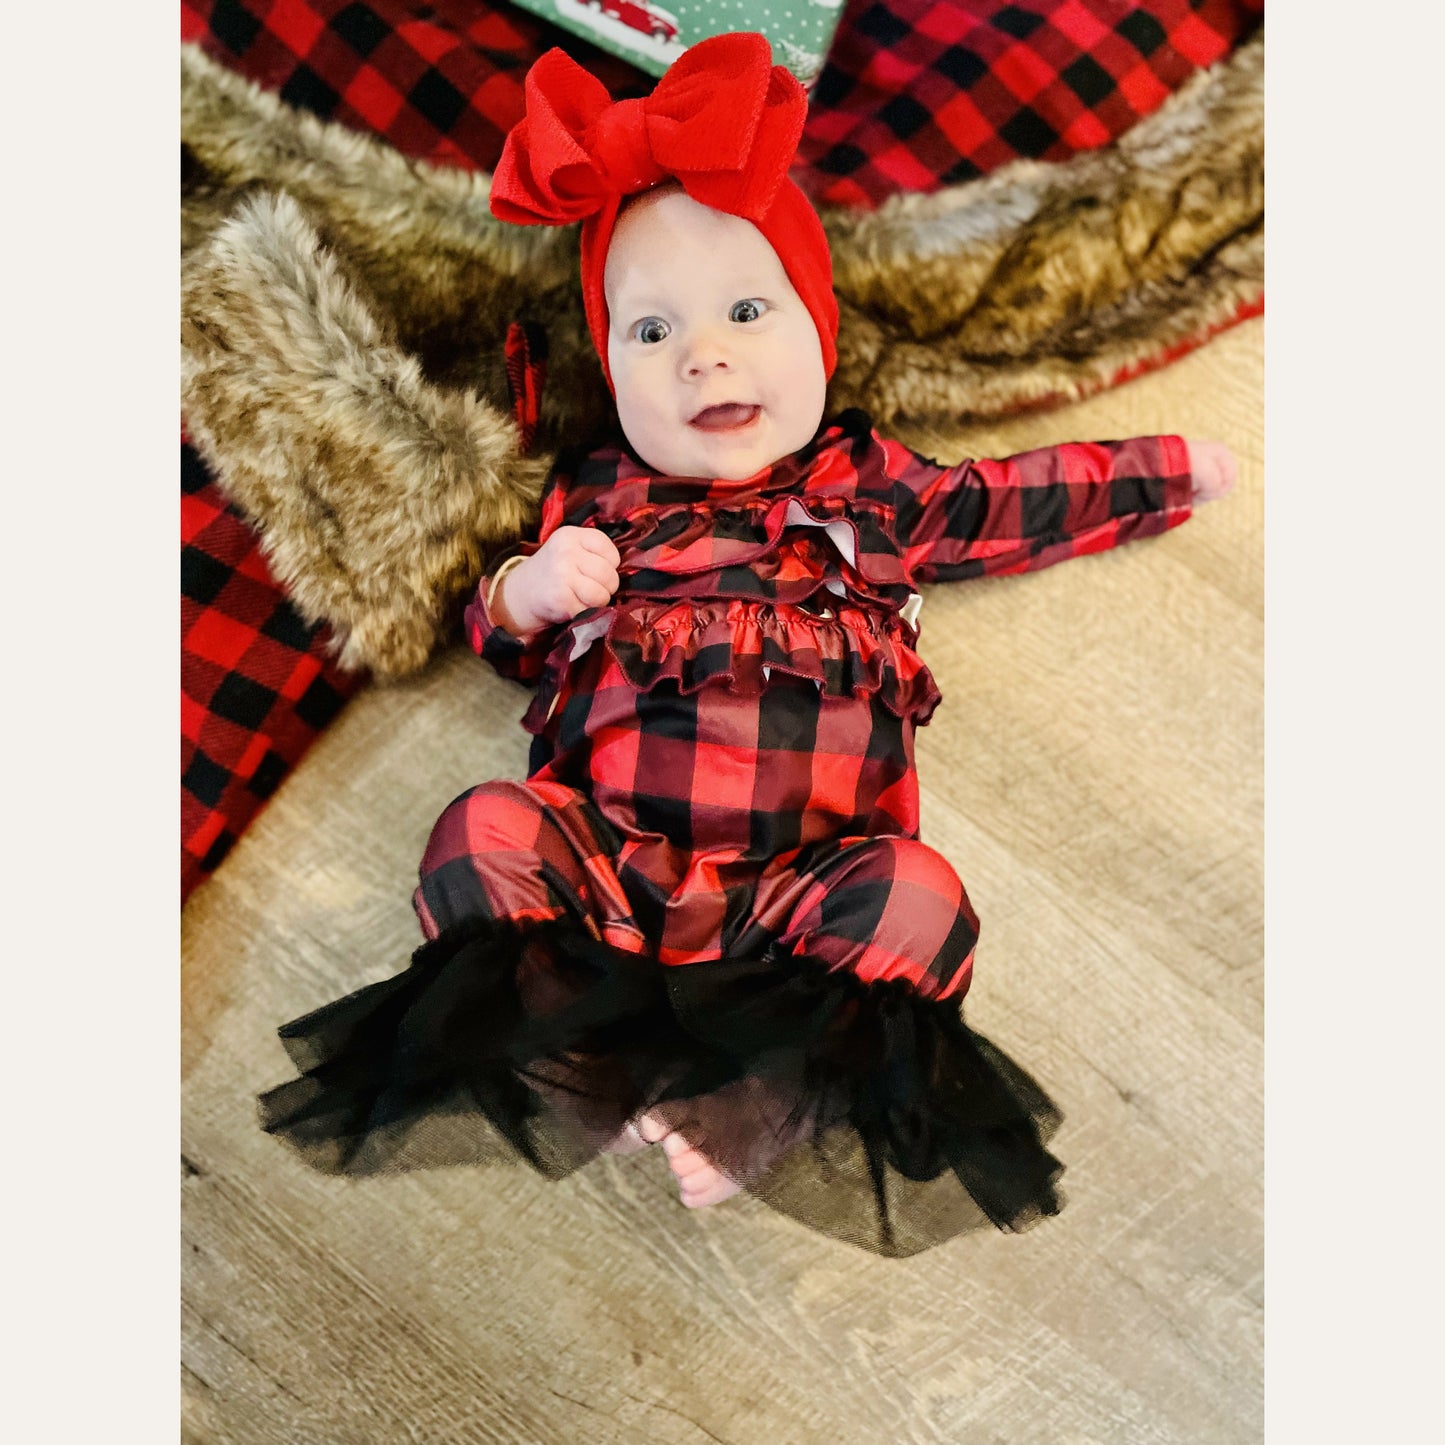                                        Ruffle Buffalo Plaid Romper  You can never have too much buffalo plaid! This romper is extra cute with the ruffles on the body and tulle ruffles at the feet!   Fits true to size. Polyester.